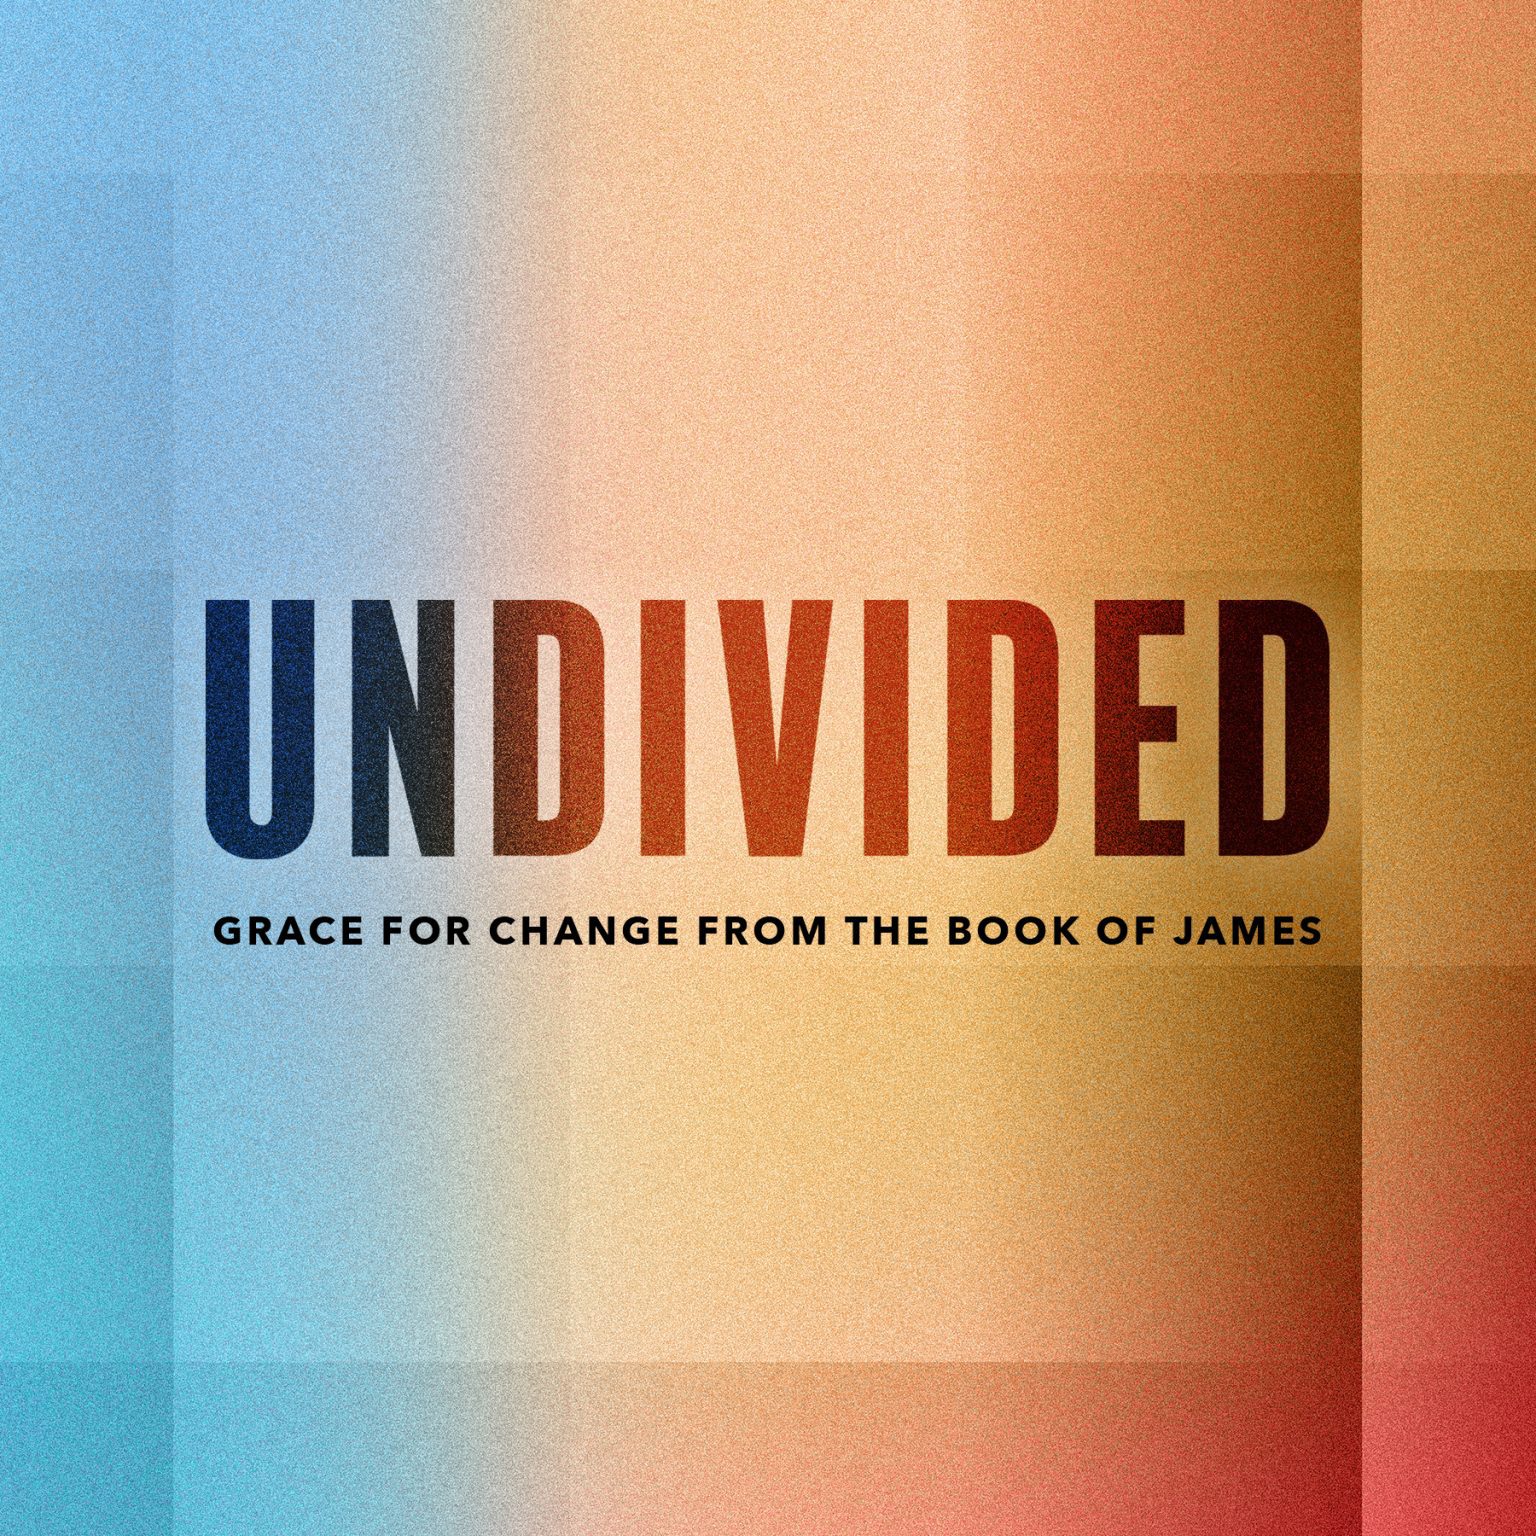 Undivided: Grace for Change from the Book of James